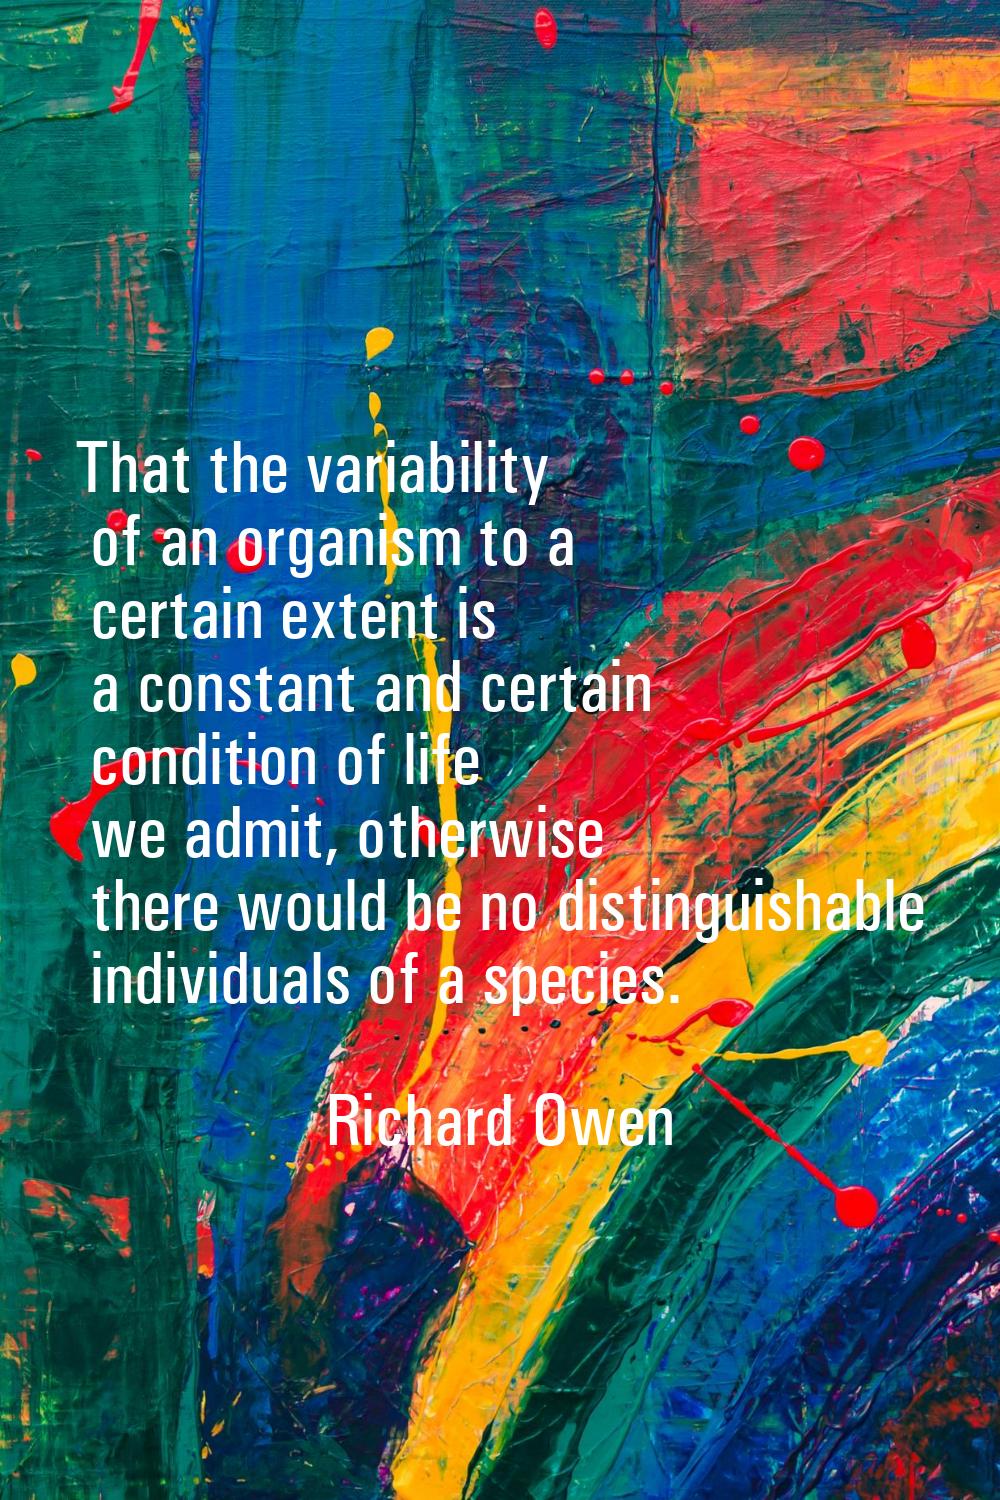 That the variability of an organism to a certain extent is a constant and certain condition of life